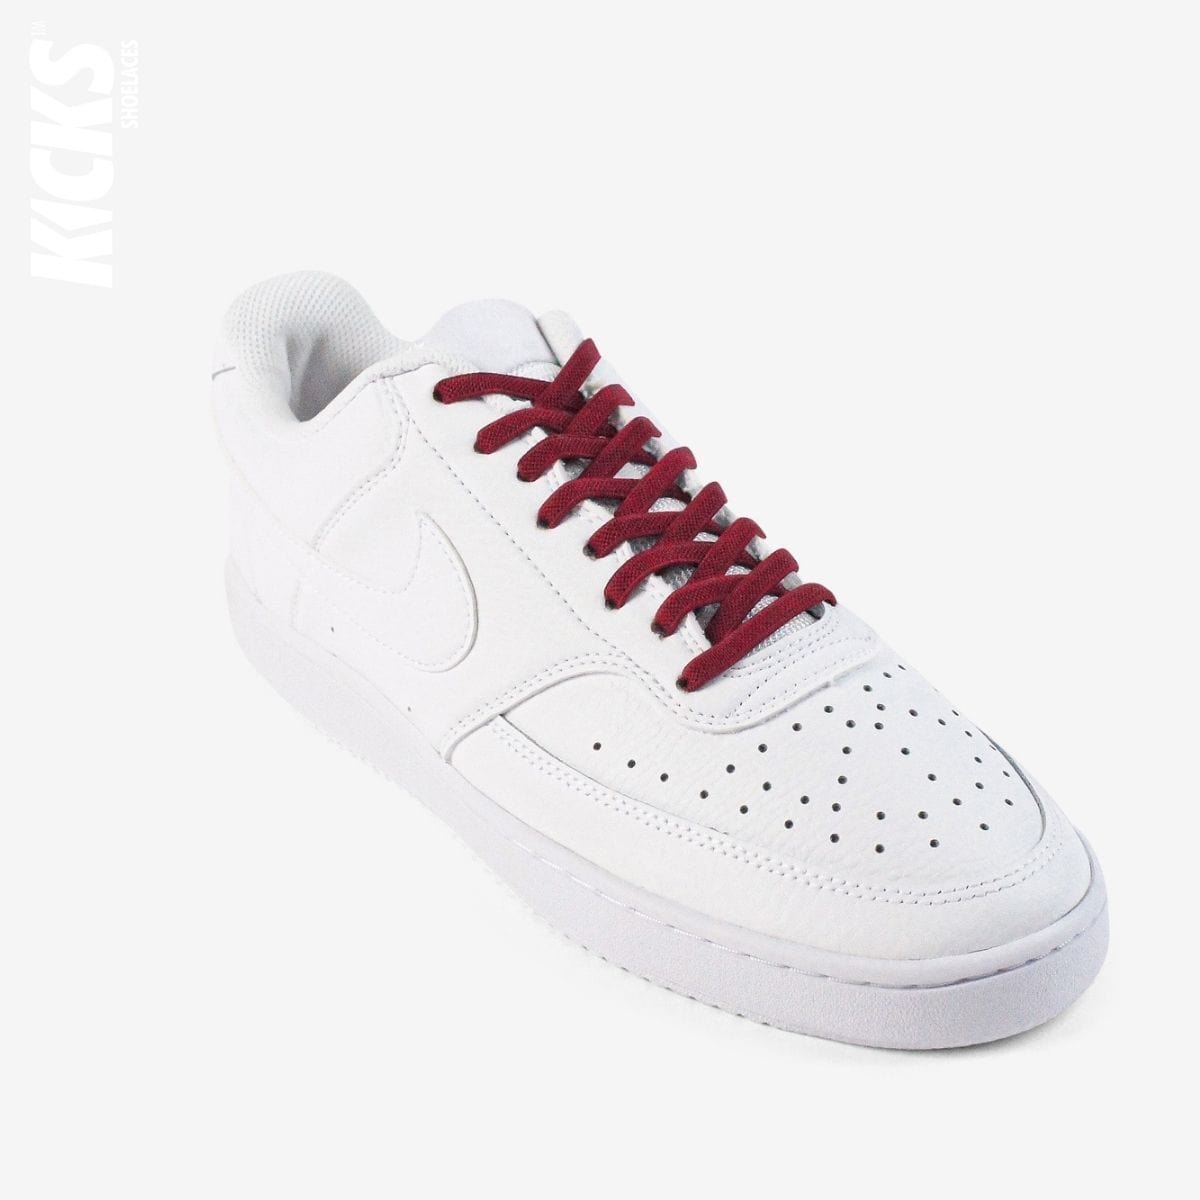 no-tie-shoelaces-with-dark-red-laces-on-nike-white-sneakers-by-kicks-shoelaces